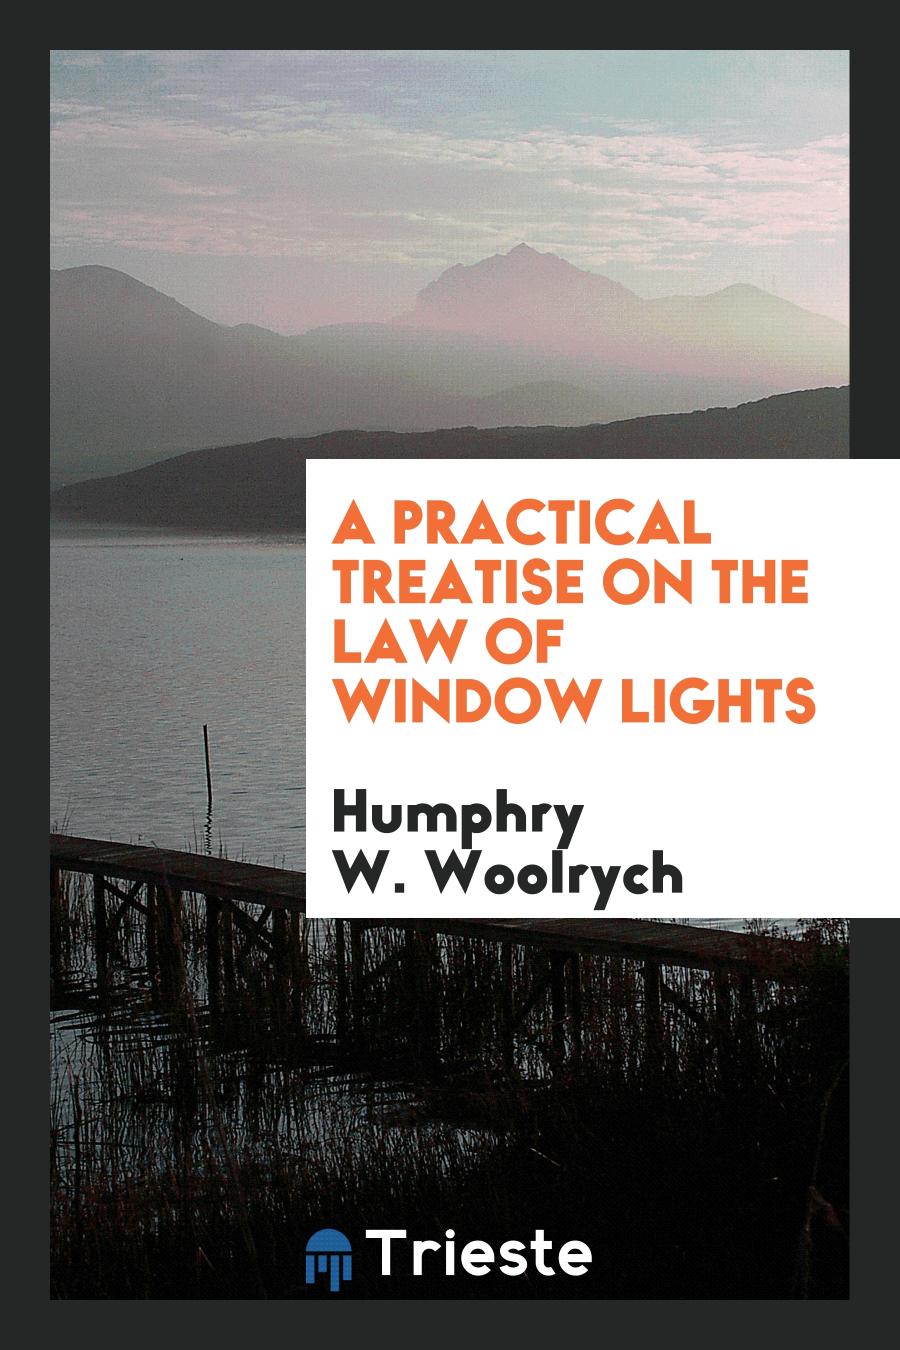 A Practical Treatise on the Law of Window Lights